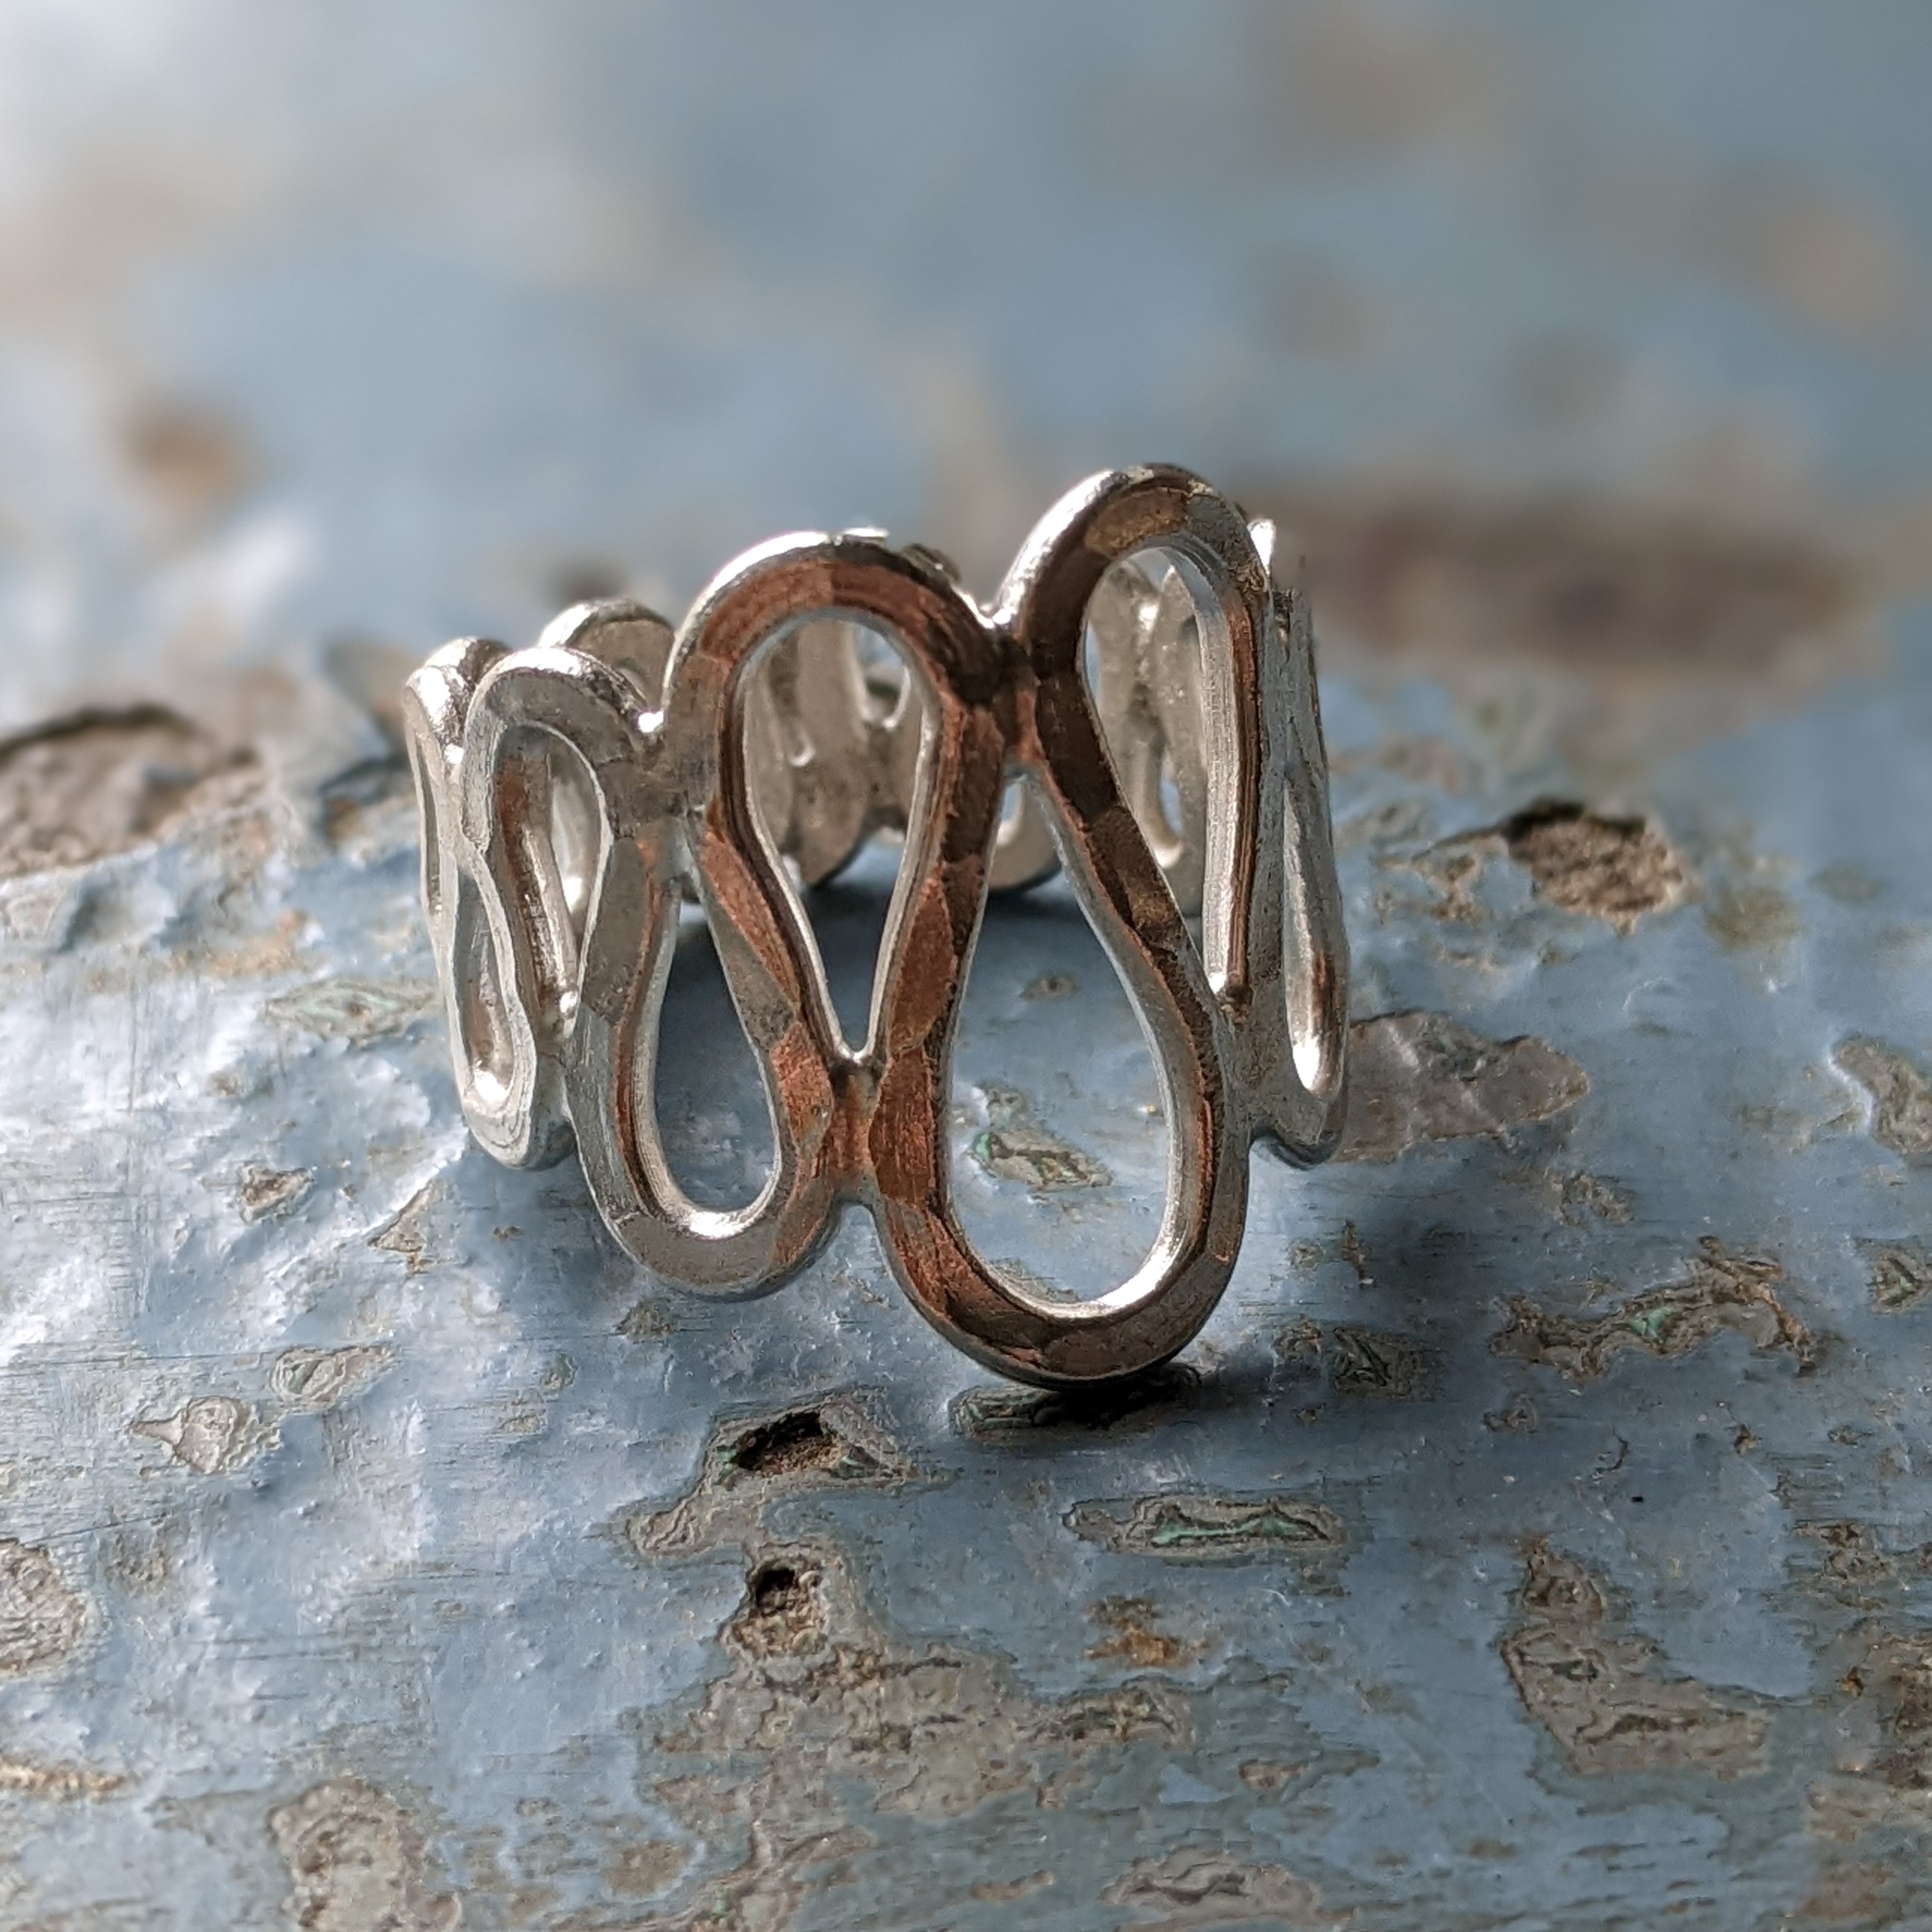 R050 Ryder Ring. Statement ring with a hammered finish and loop shape design